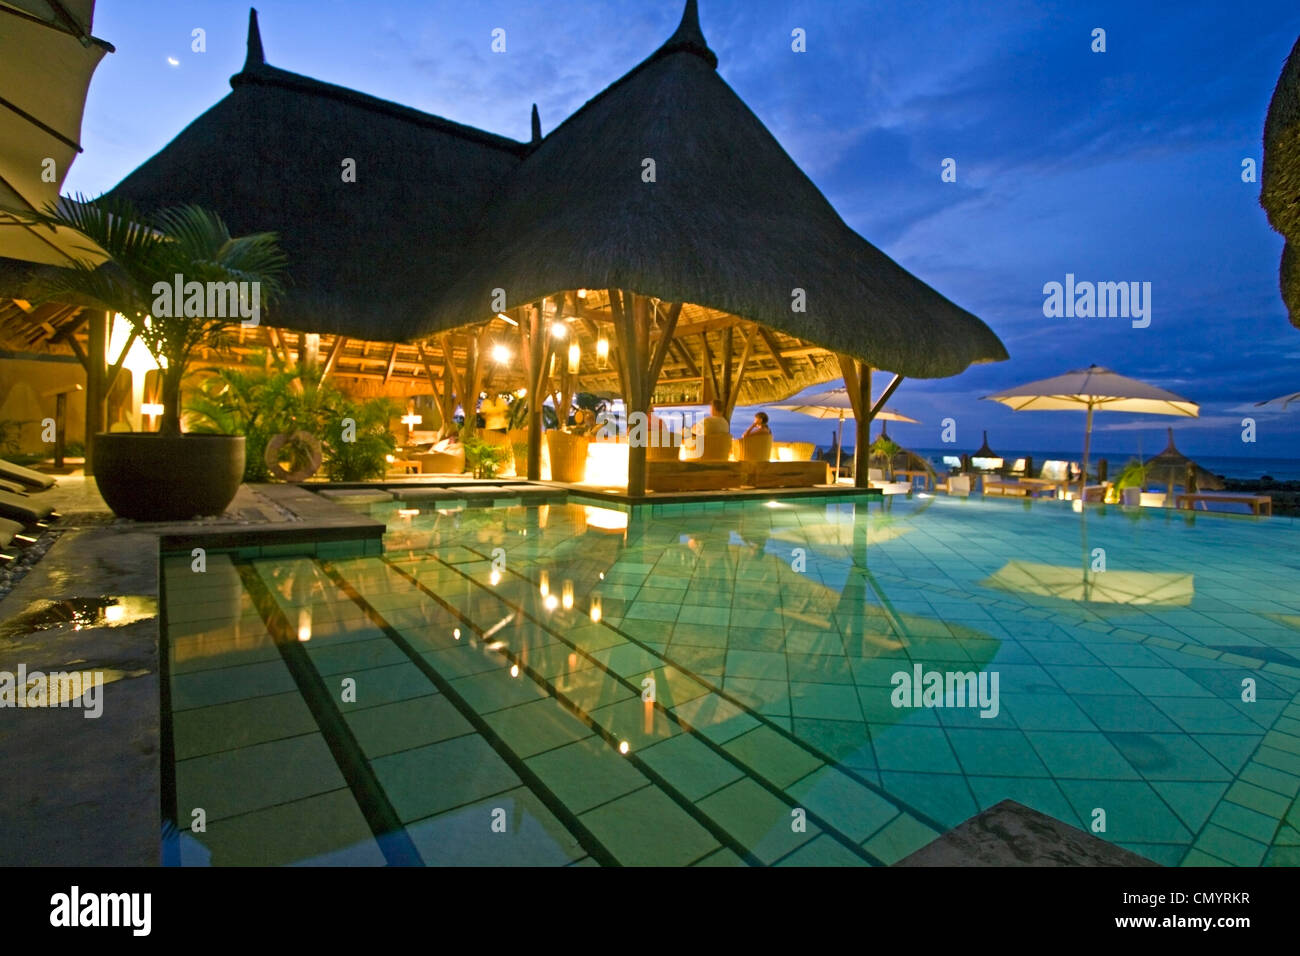 Pool and Hotel Bar of Veranda Hotel Resort and Spa at Troux aux Biches, Mauritius, Africa Stock Photo